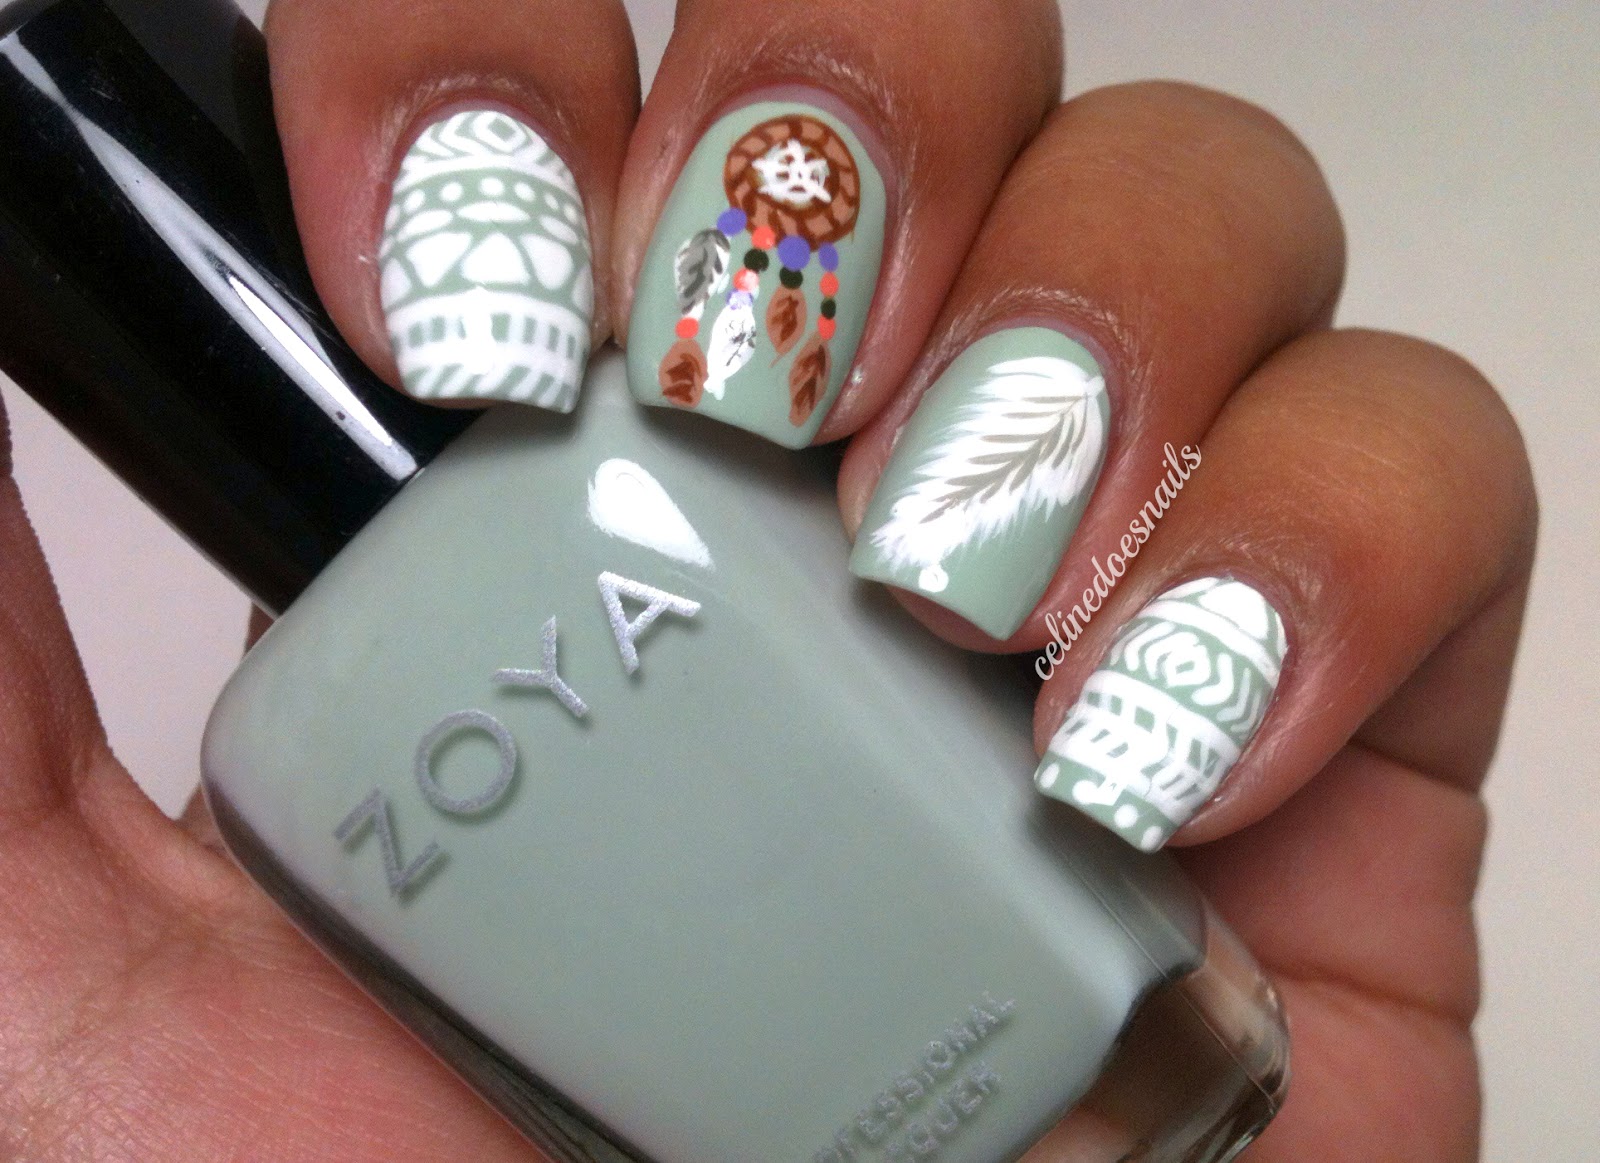 2. Tribal Nail Designs - wide 8